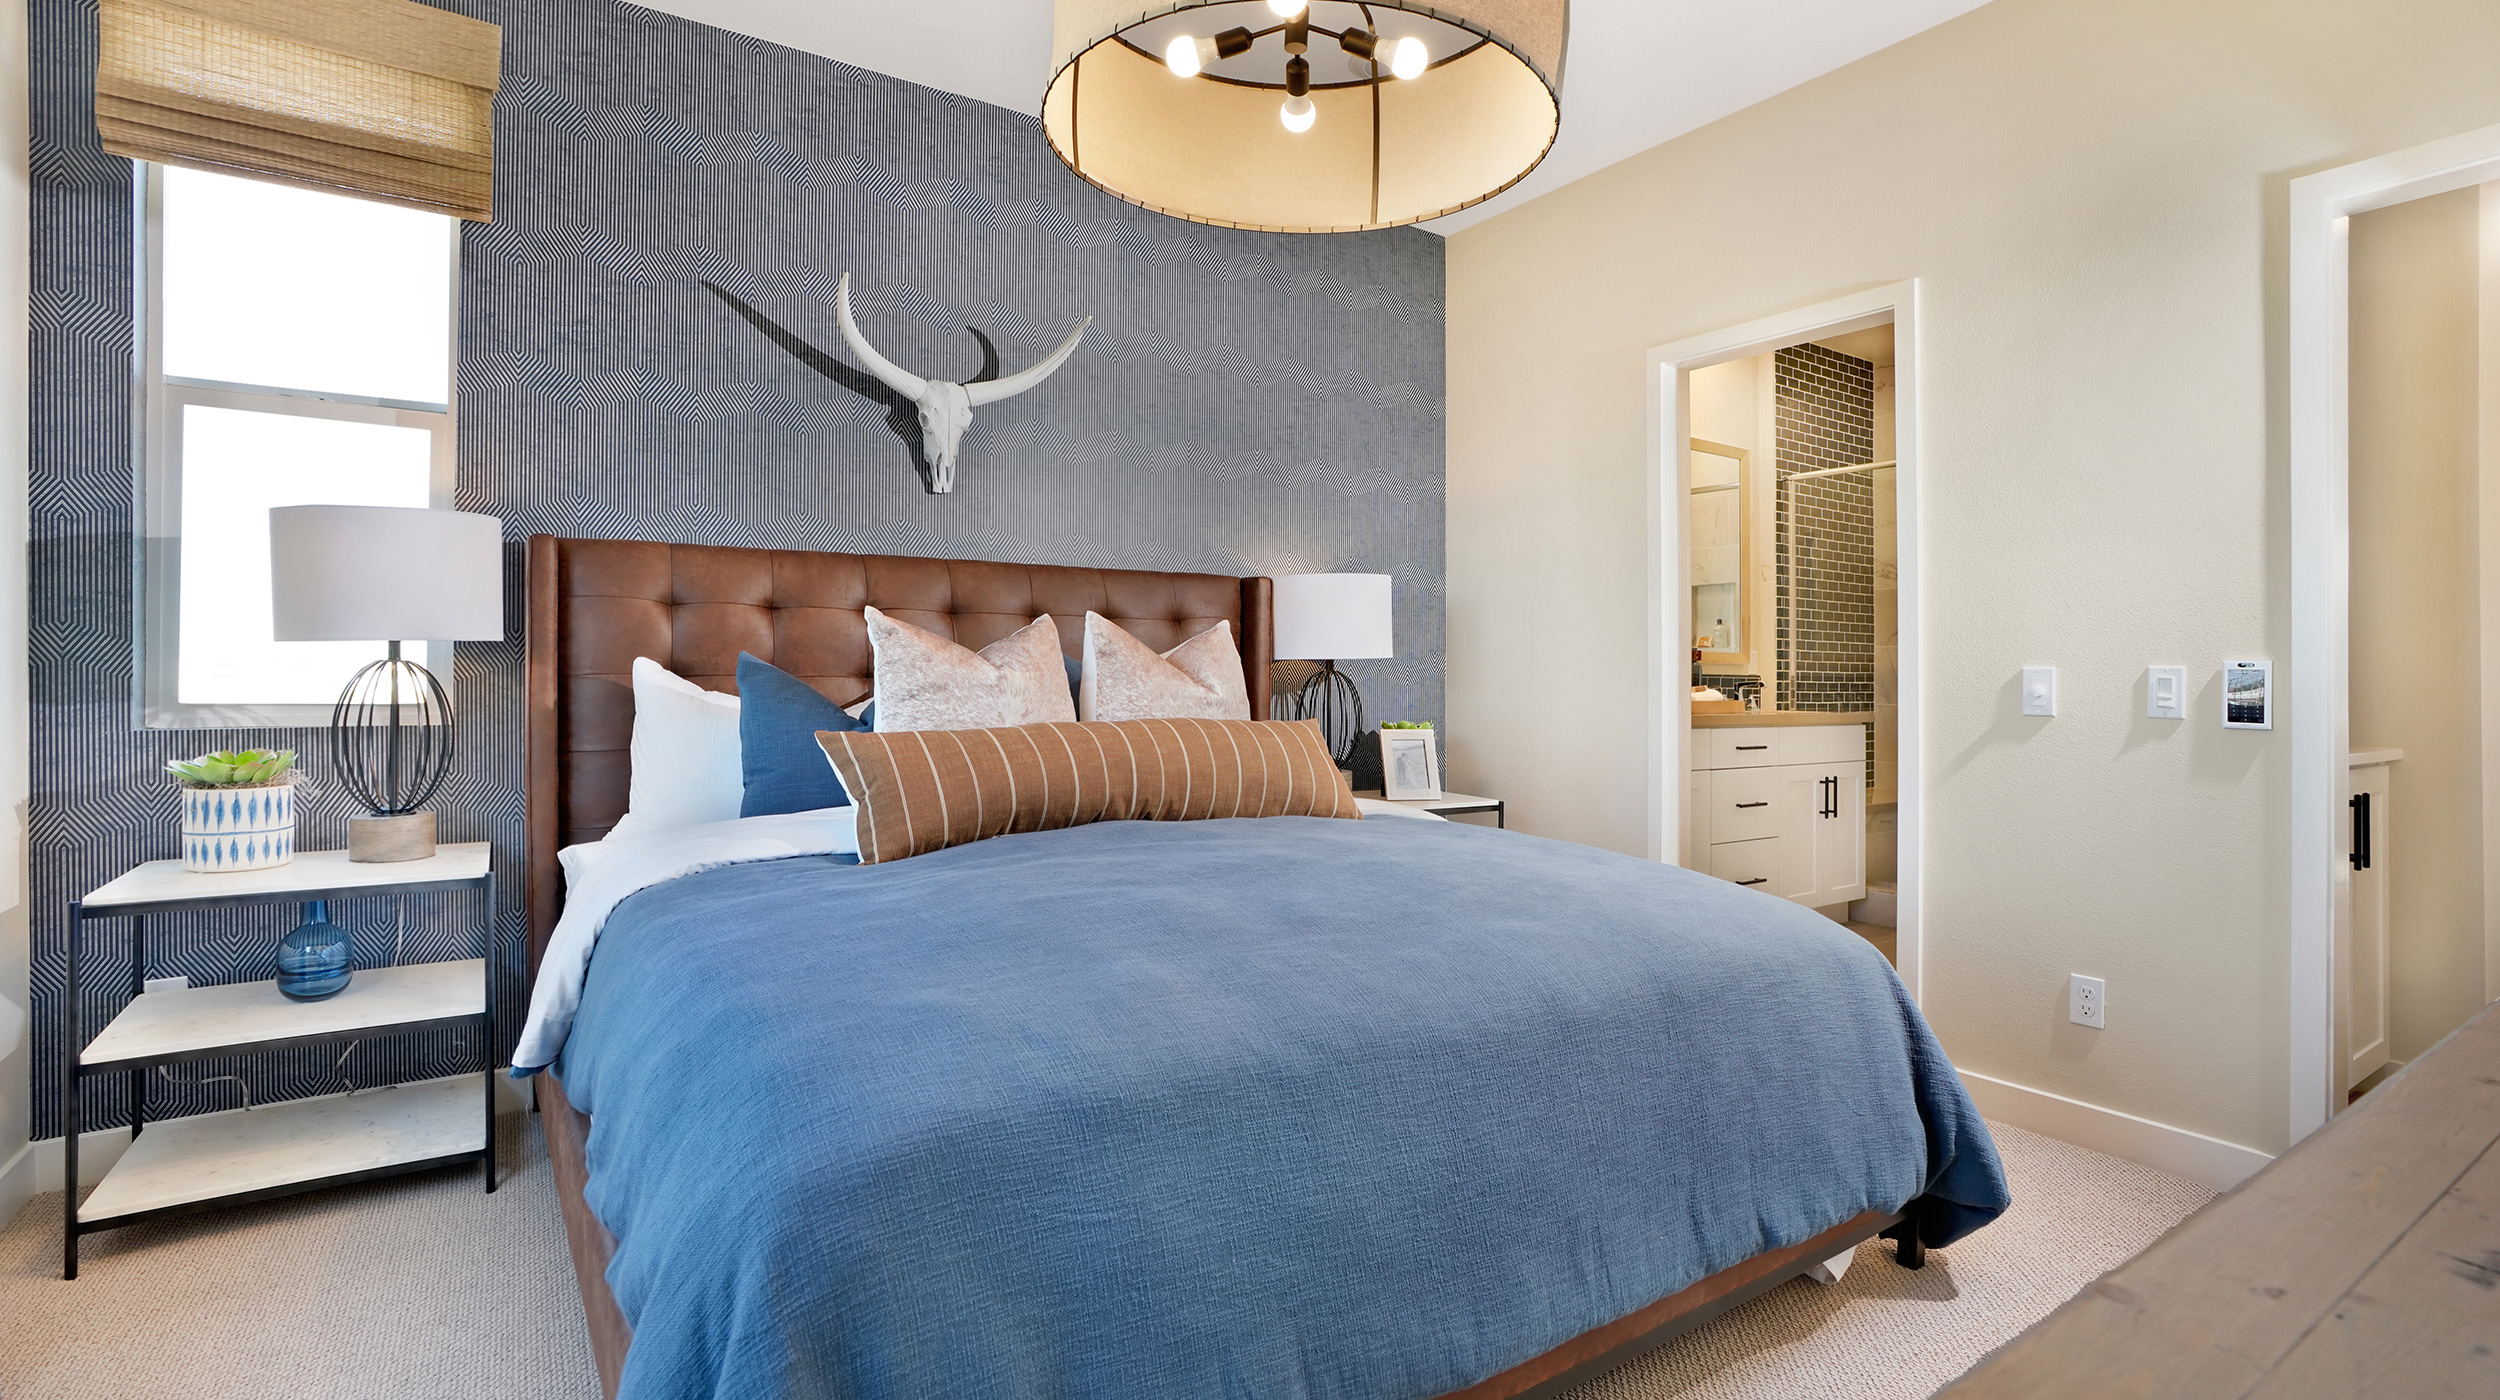 Primary Bedroom in home at Moneta Pointe by Melia Homes in Gardena, CA